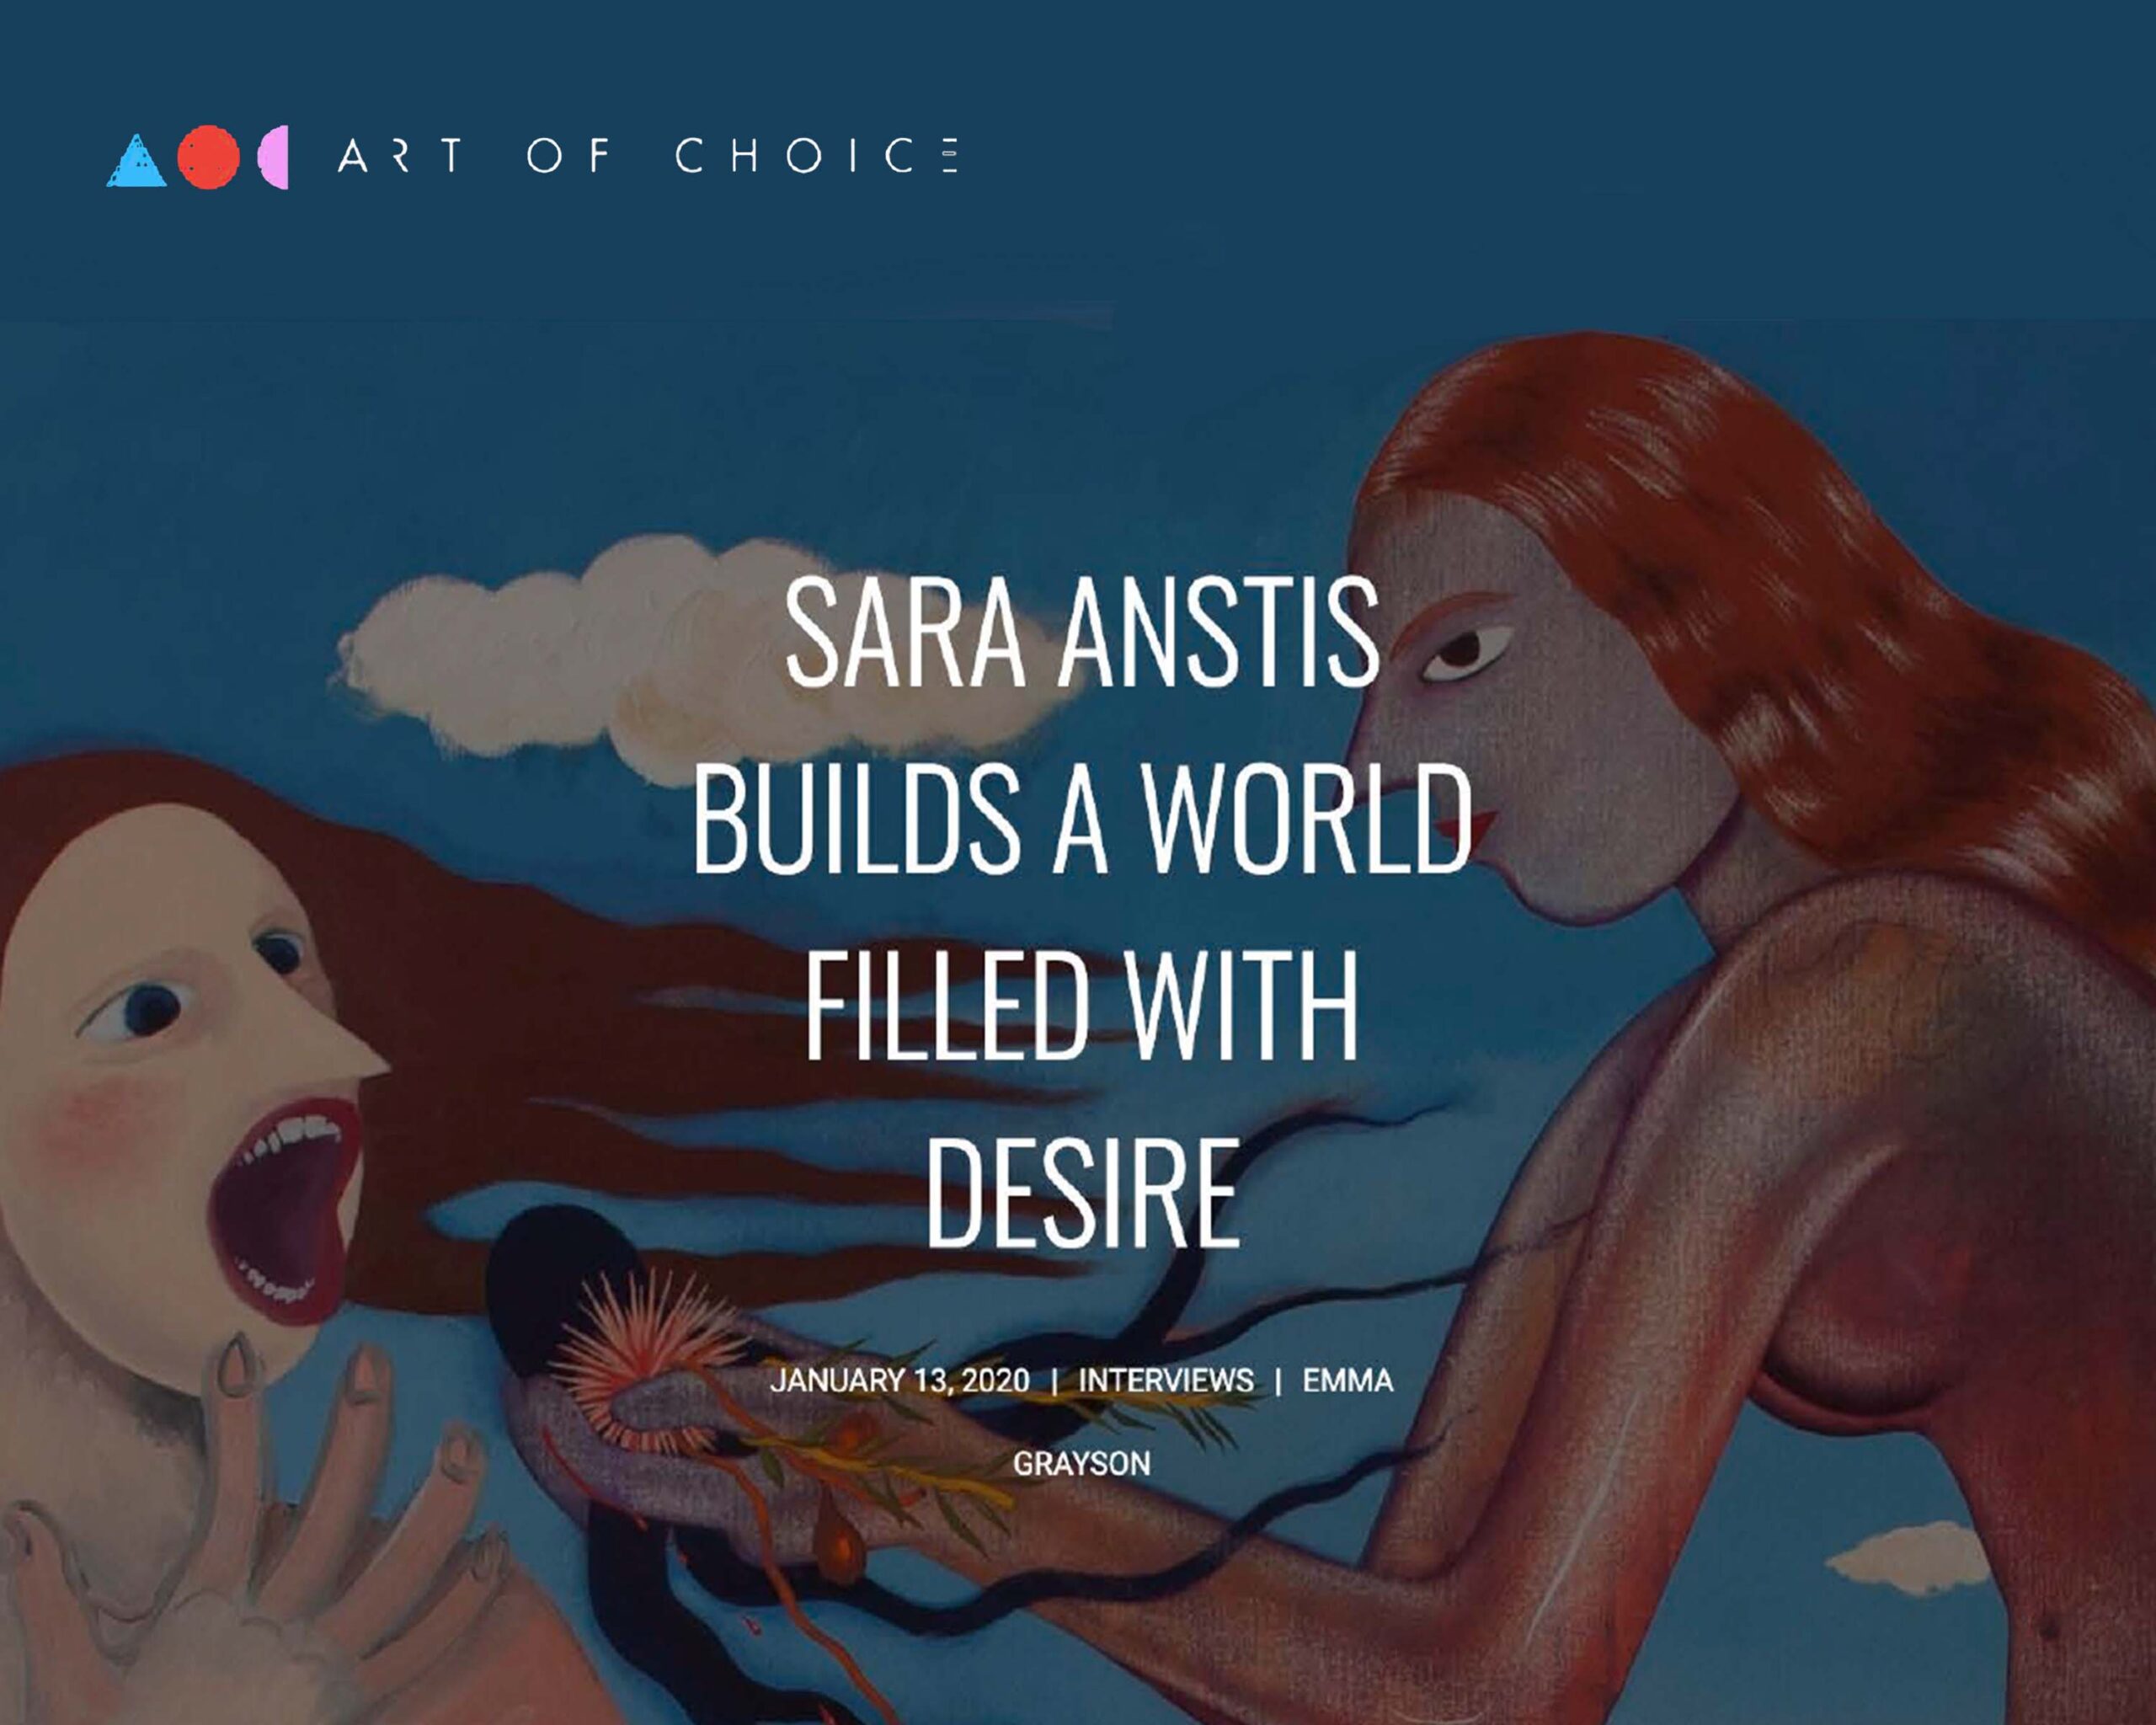 Art of Choice, 2020 | Sara Anstis Builds a World Filled with Desire